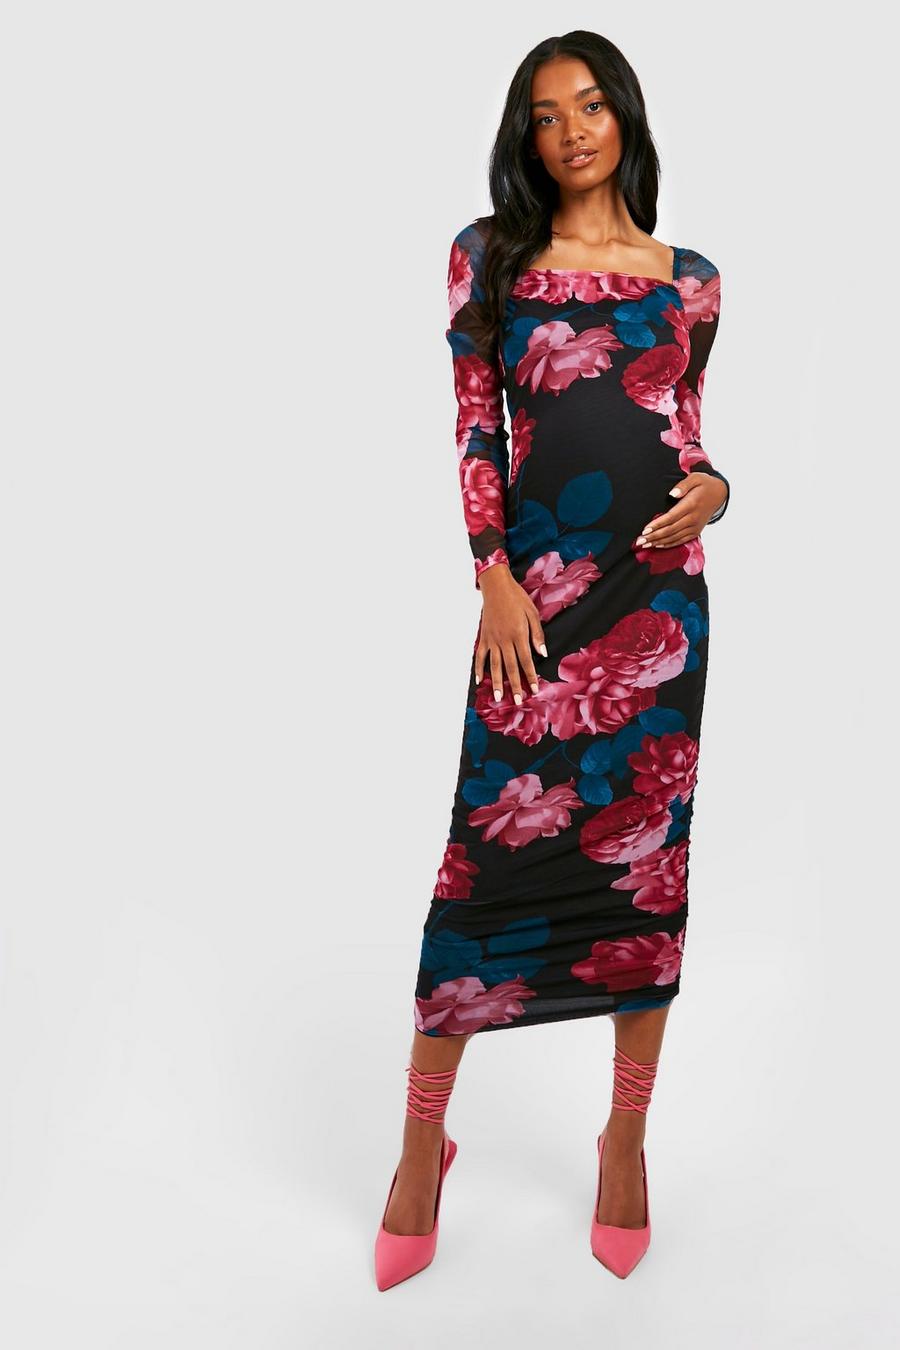 USA 6. Boohoo "NUIT" Rose Floral Robe Moulante Taille 10 UE 38 